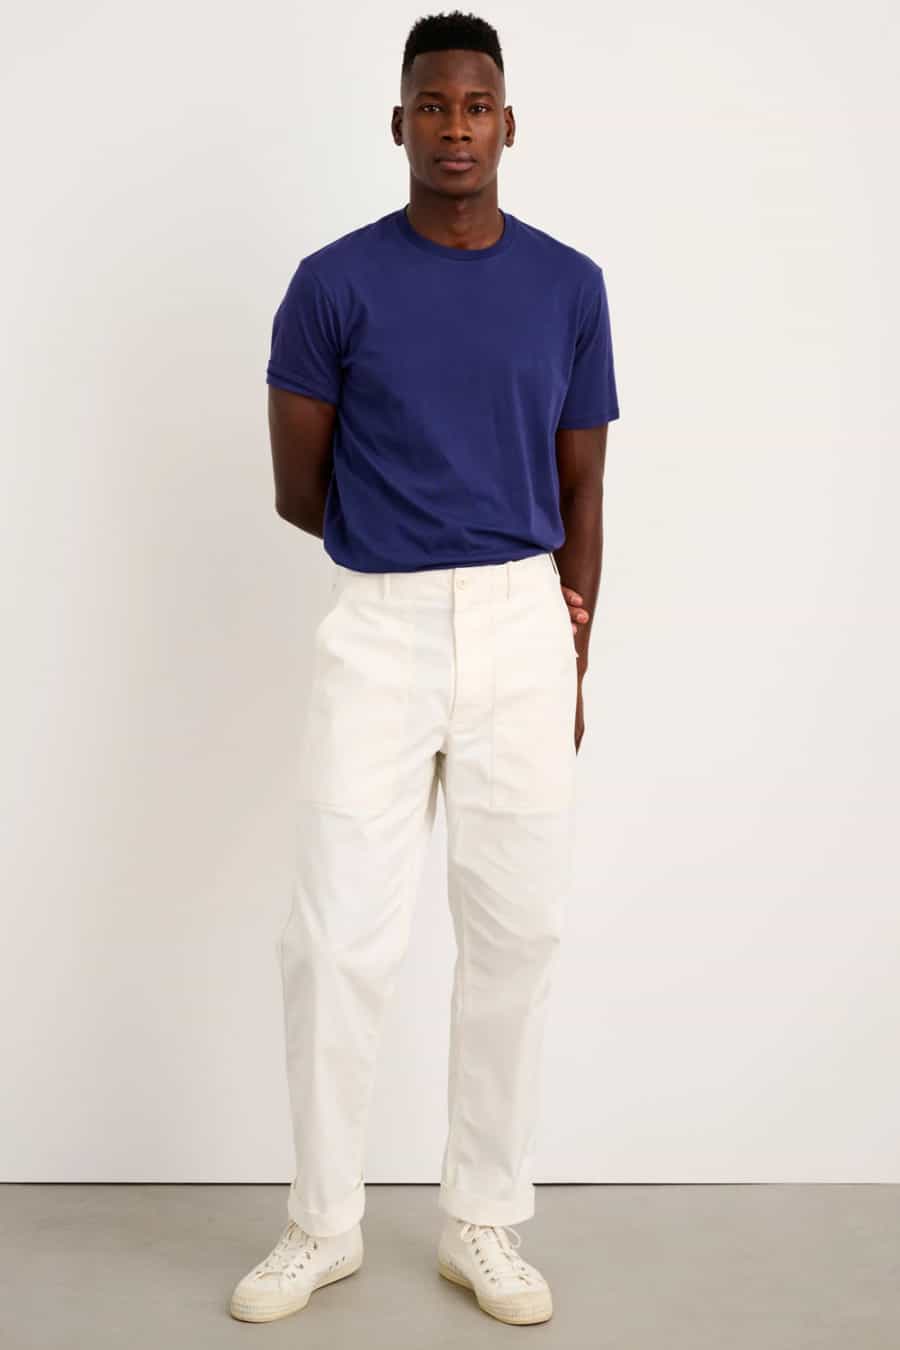 What To Wear With White Pants For Men?